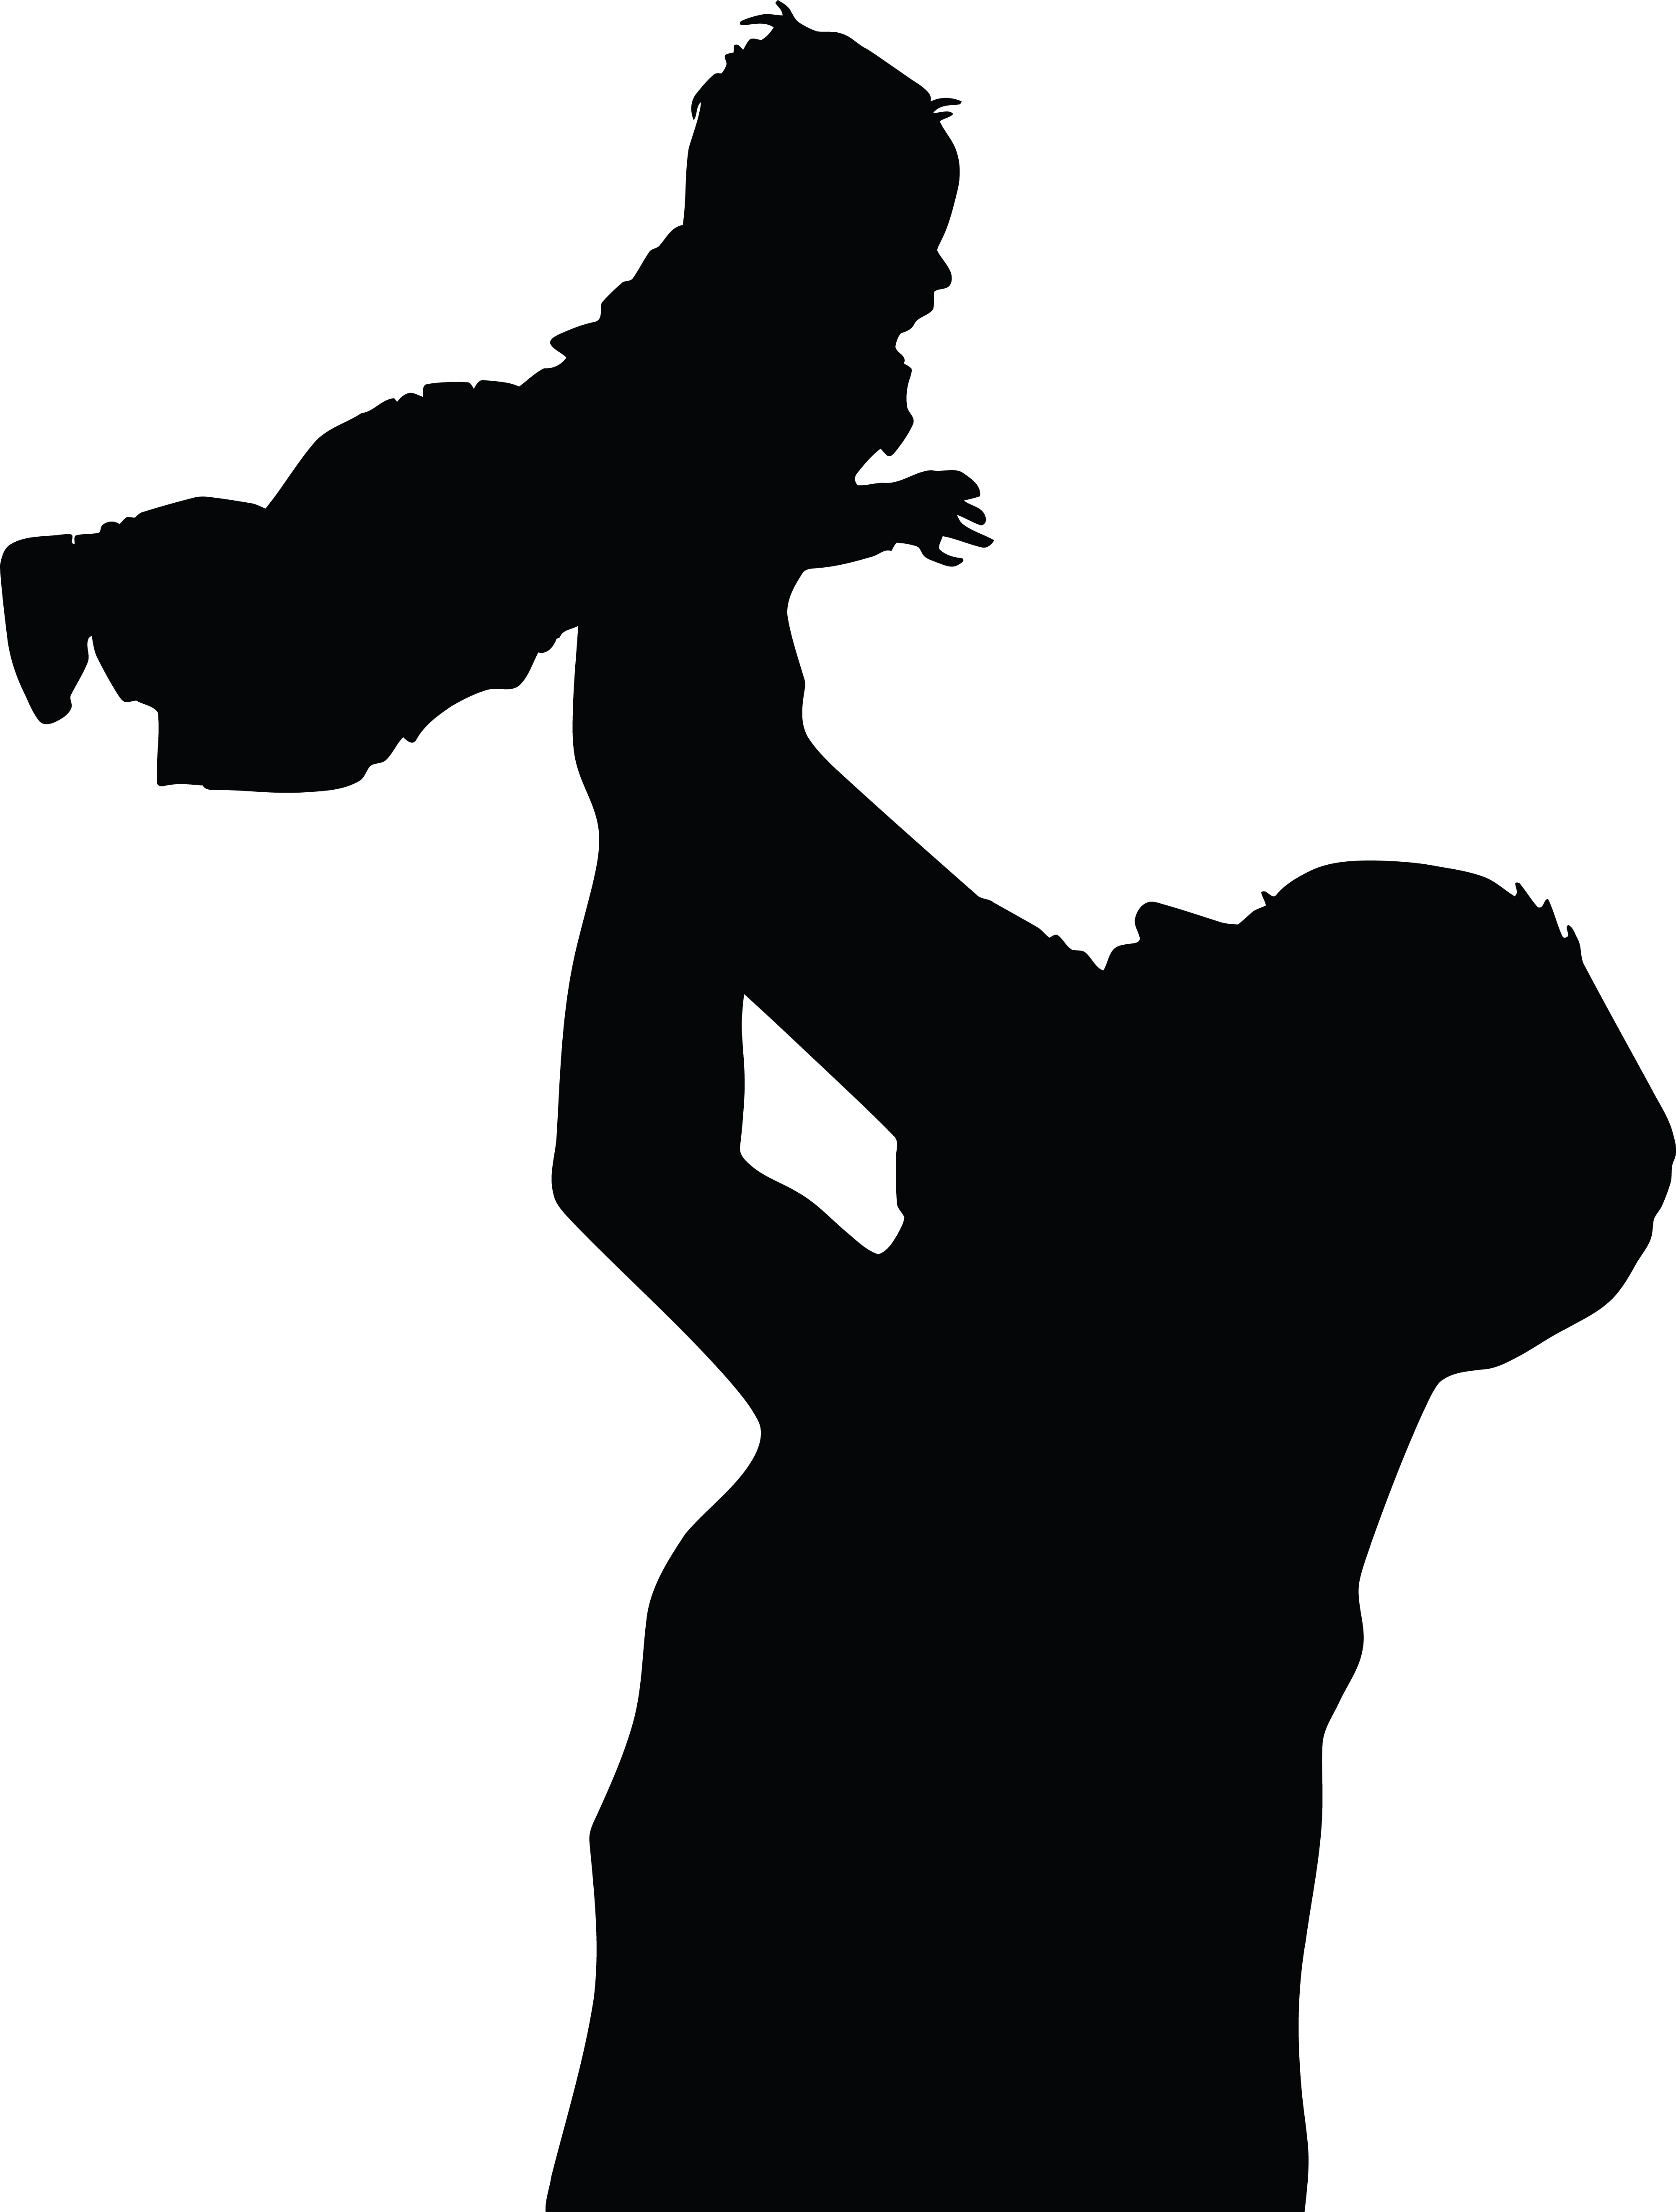 Download Free Clipart Of A silhouetted father holding up a baby